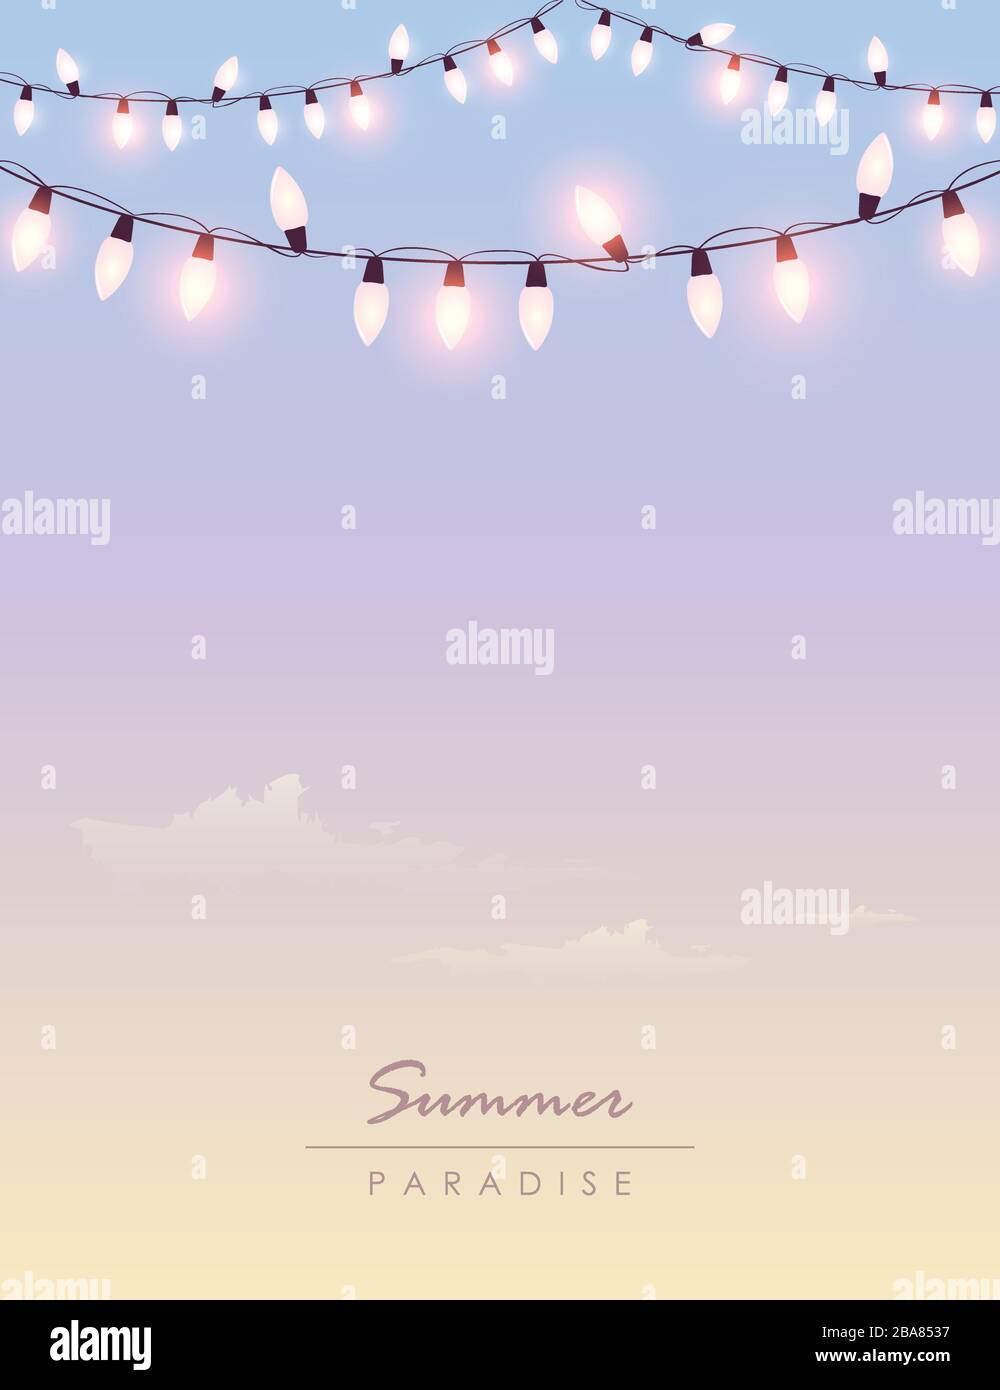 bright summer paradise sky background with fairy light vector illustration EPS10 Stock Vector